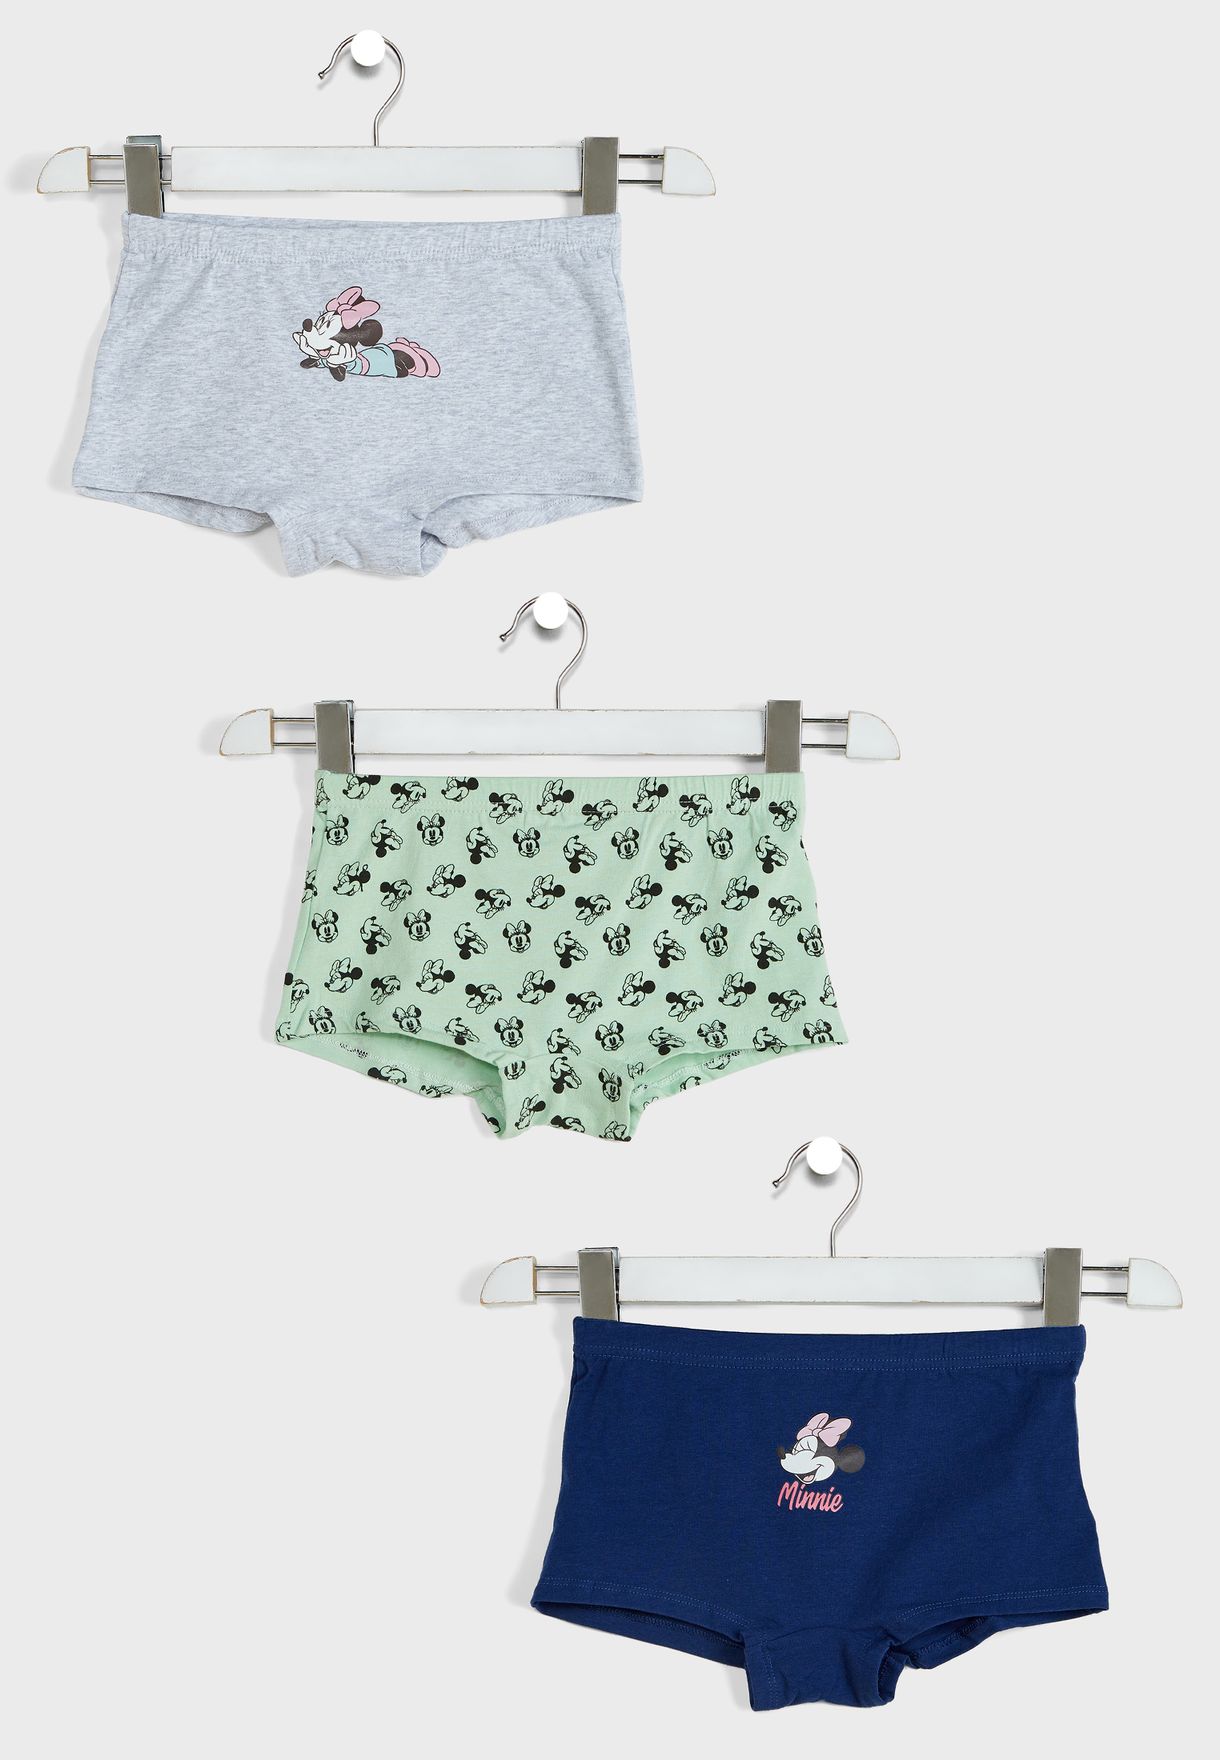 Youth 3 Pack Minnie Mouse Boxers